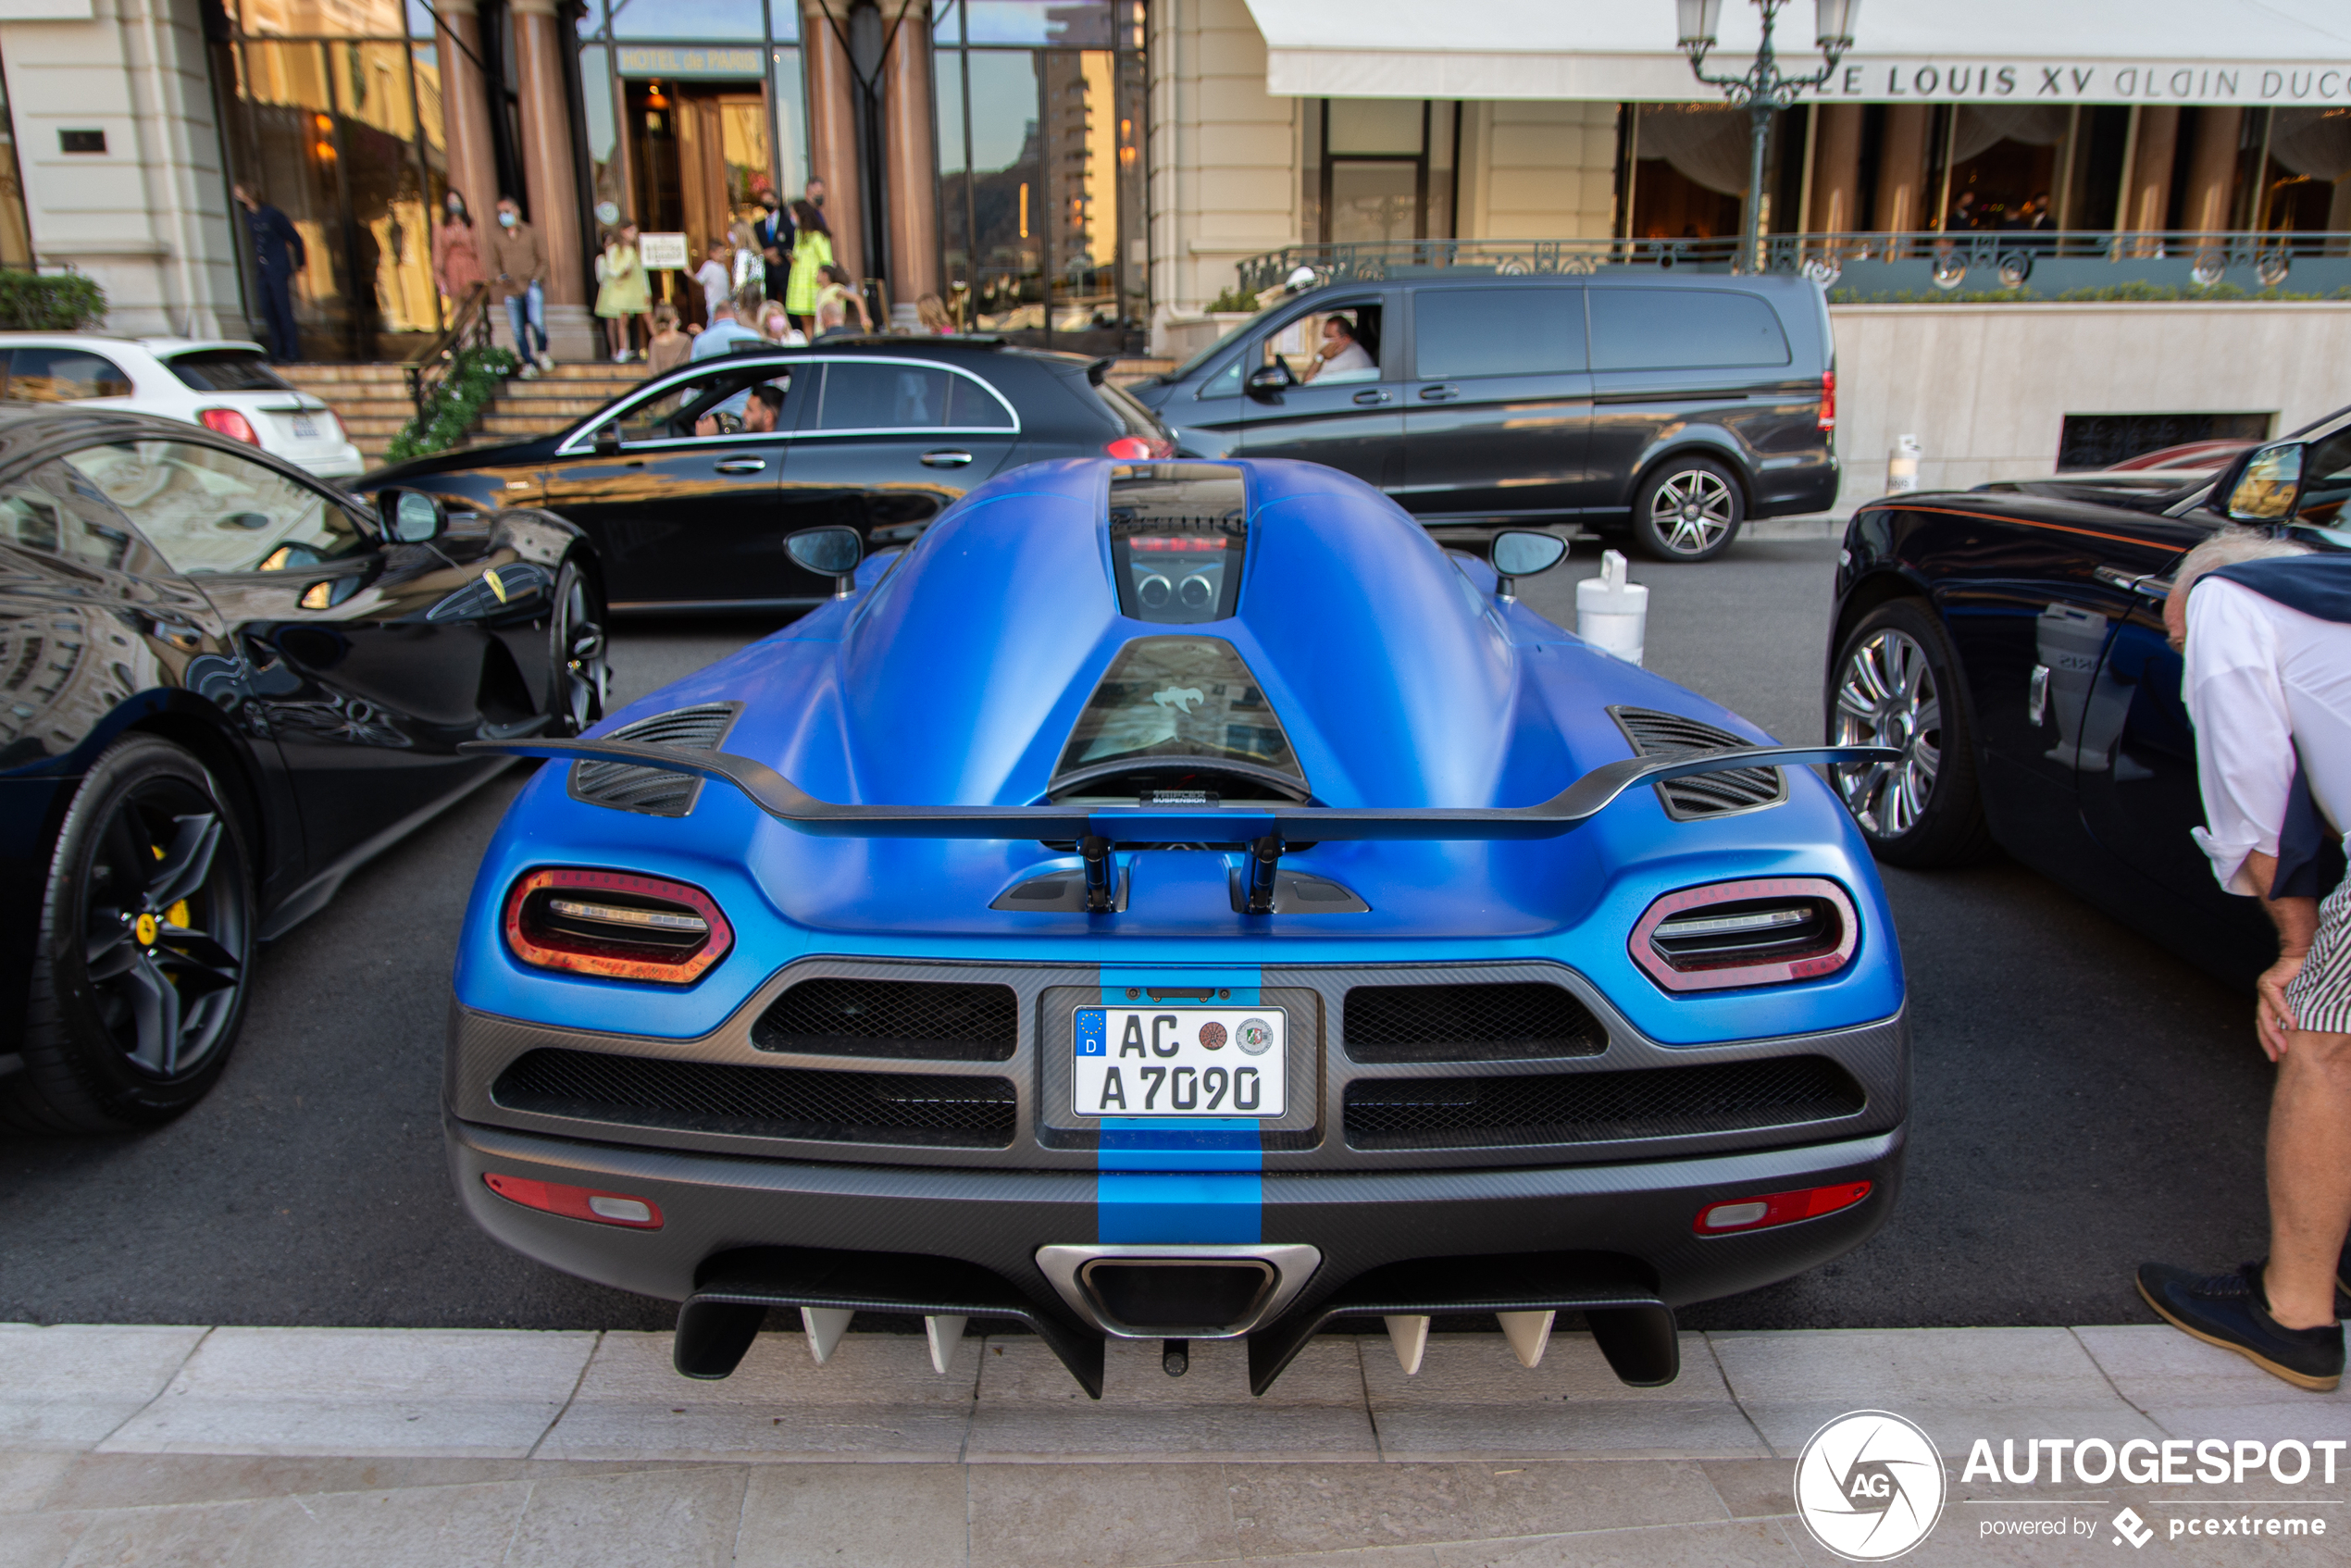 Finally we get to see a new Koenigsegg Agera R